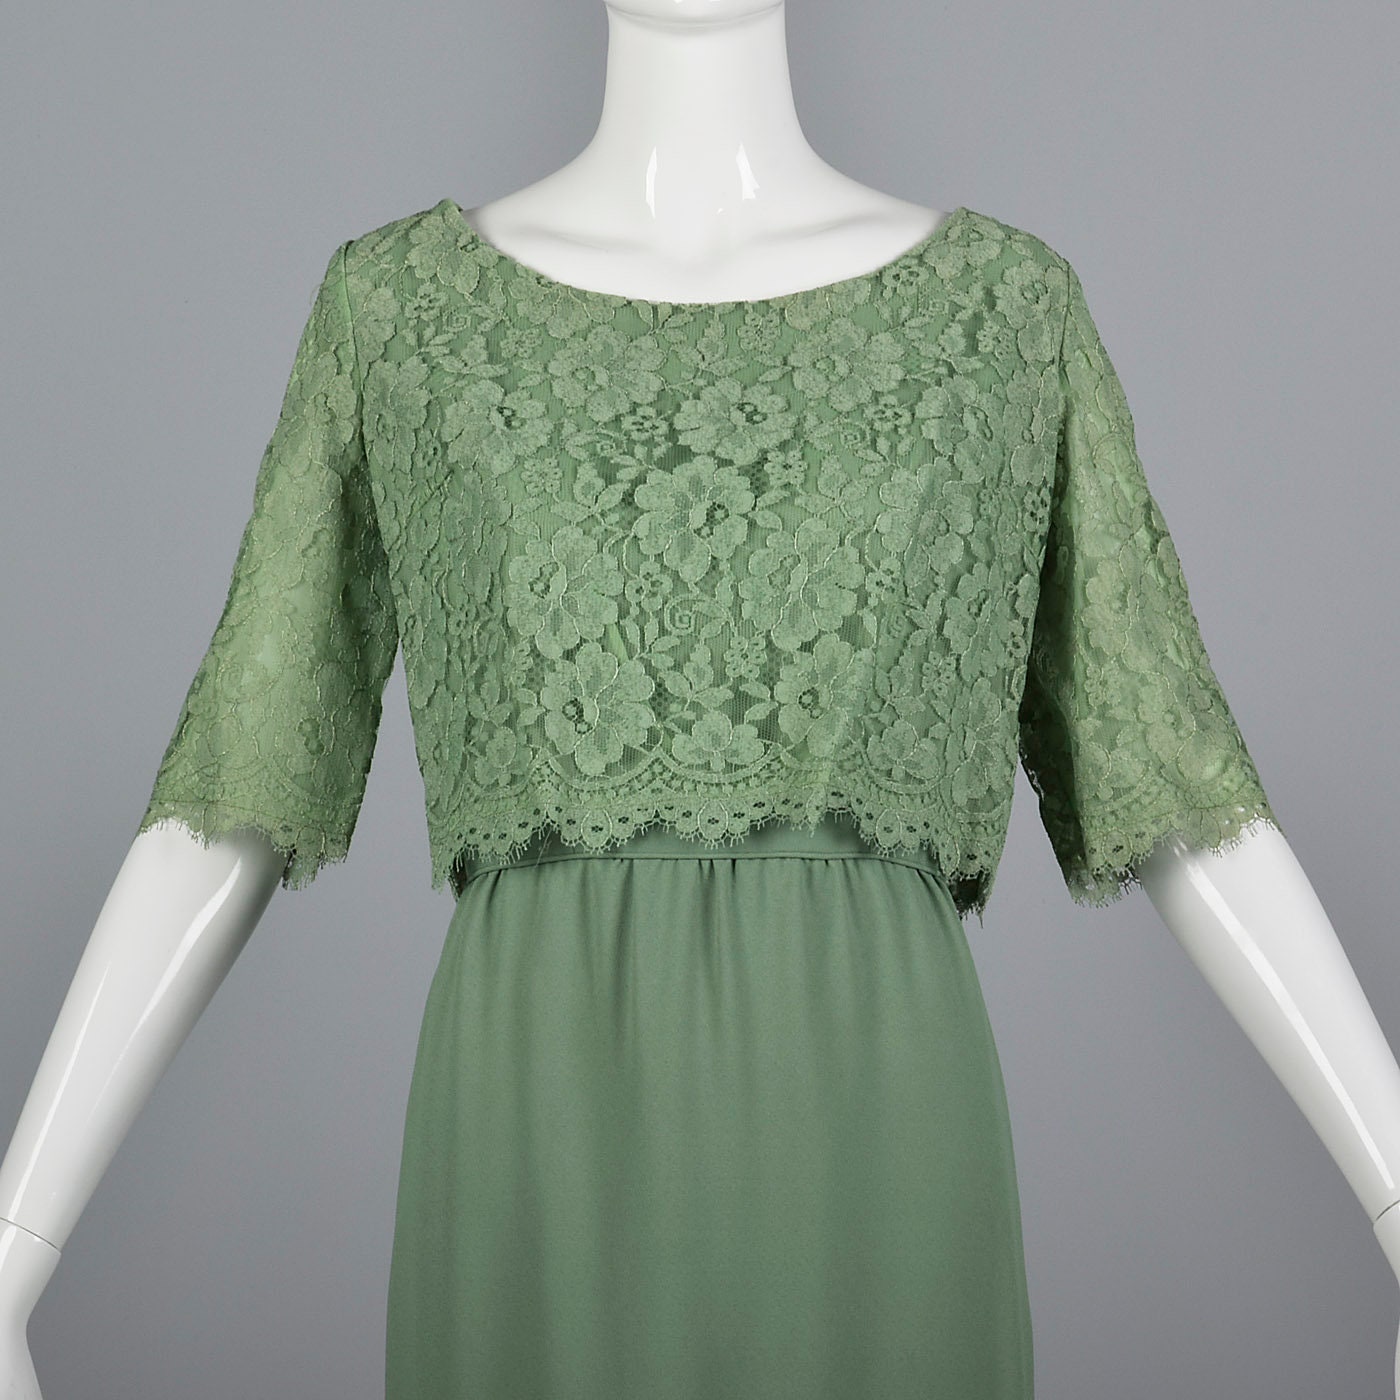 Medium Emma Domb 1960s Dress Green Cocktail Dress Lace Overlay Party ...